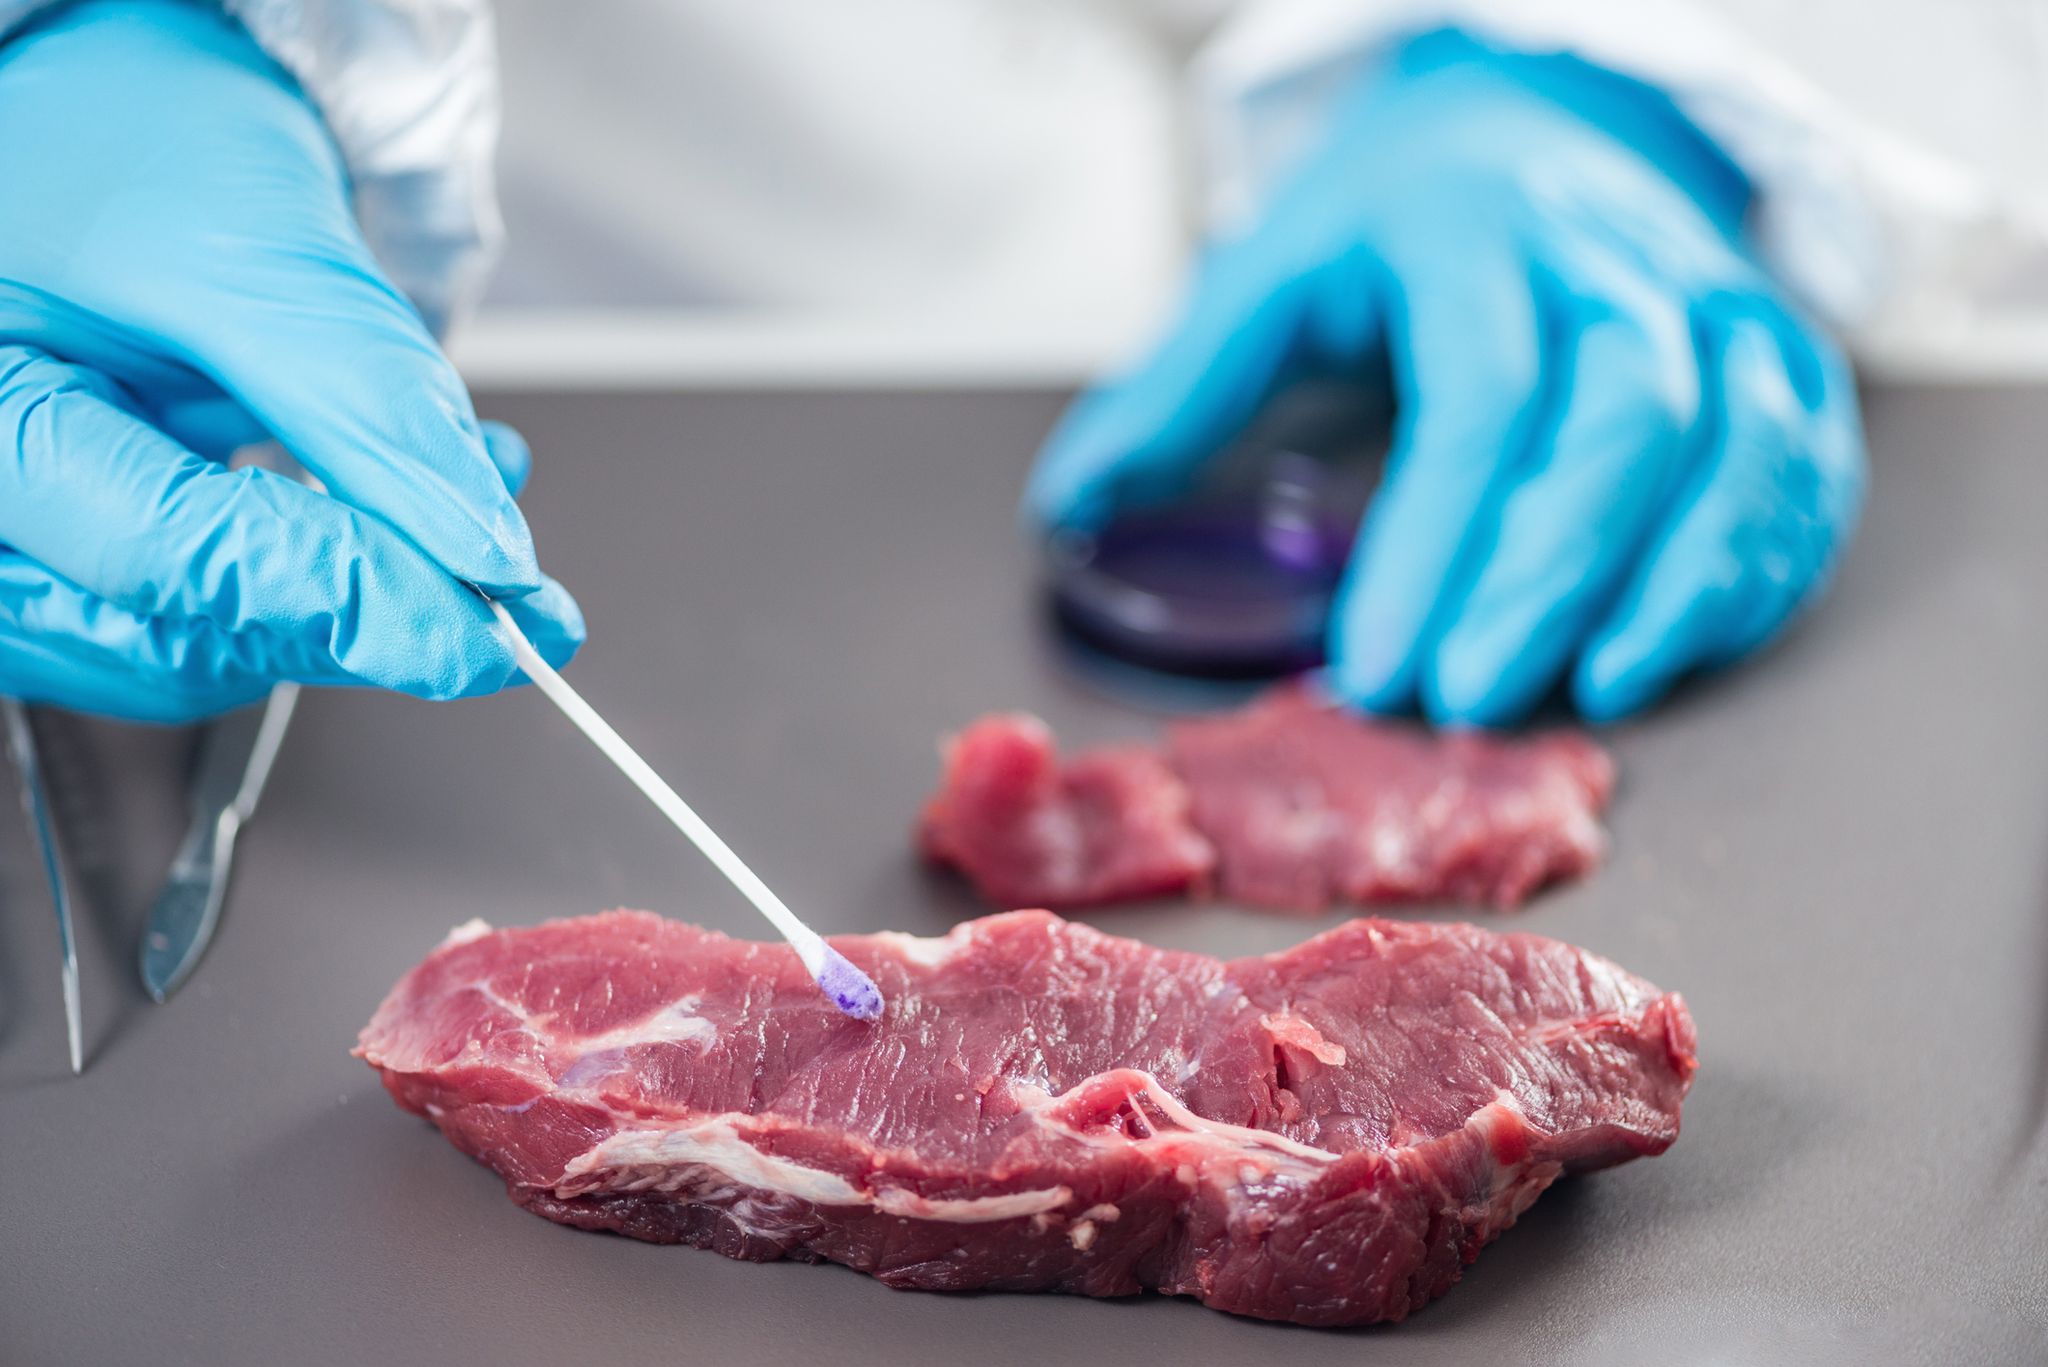 Food safety laboratory technician testing red meat